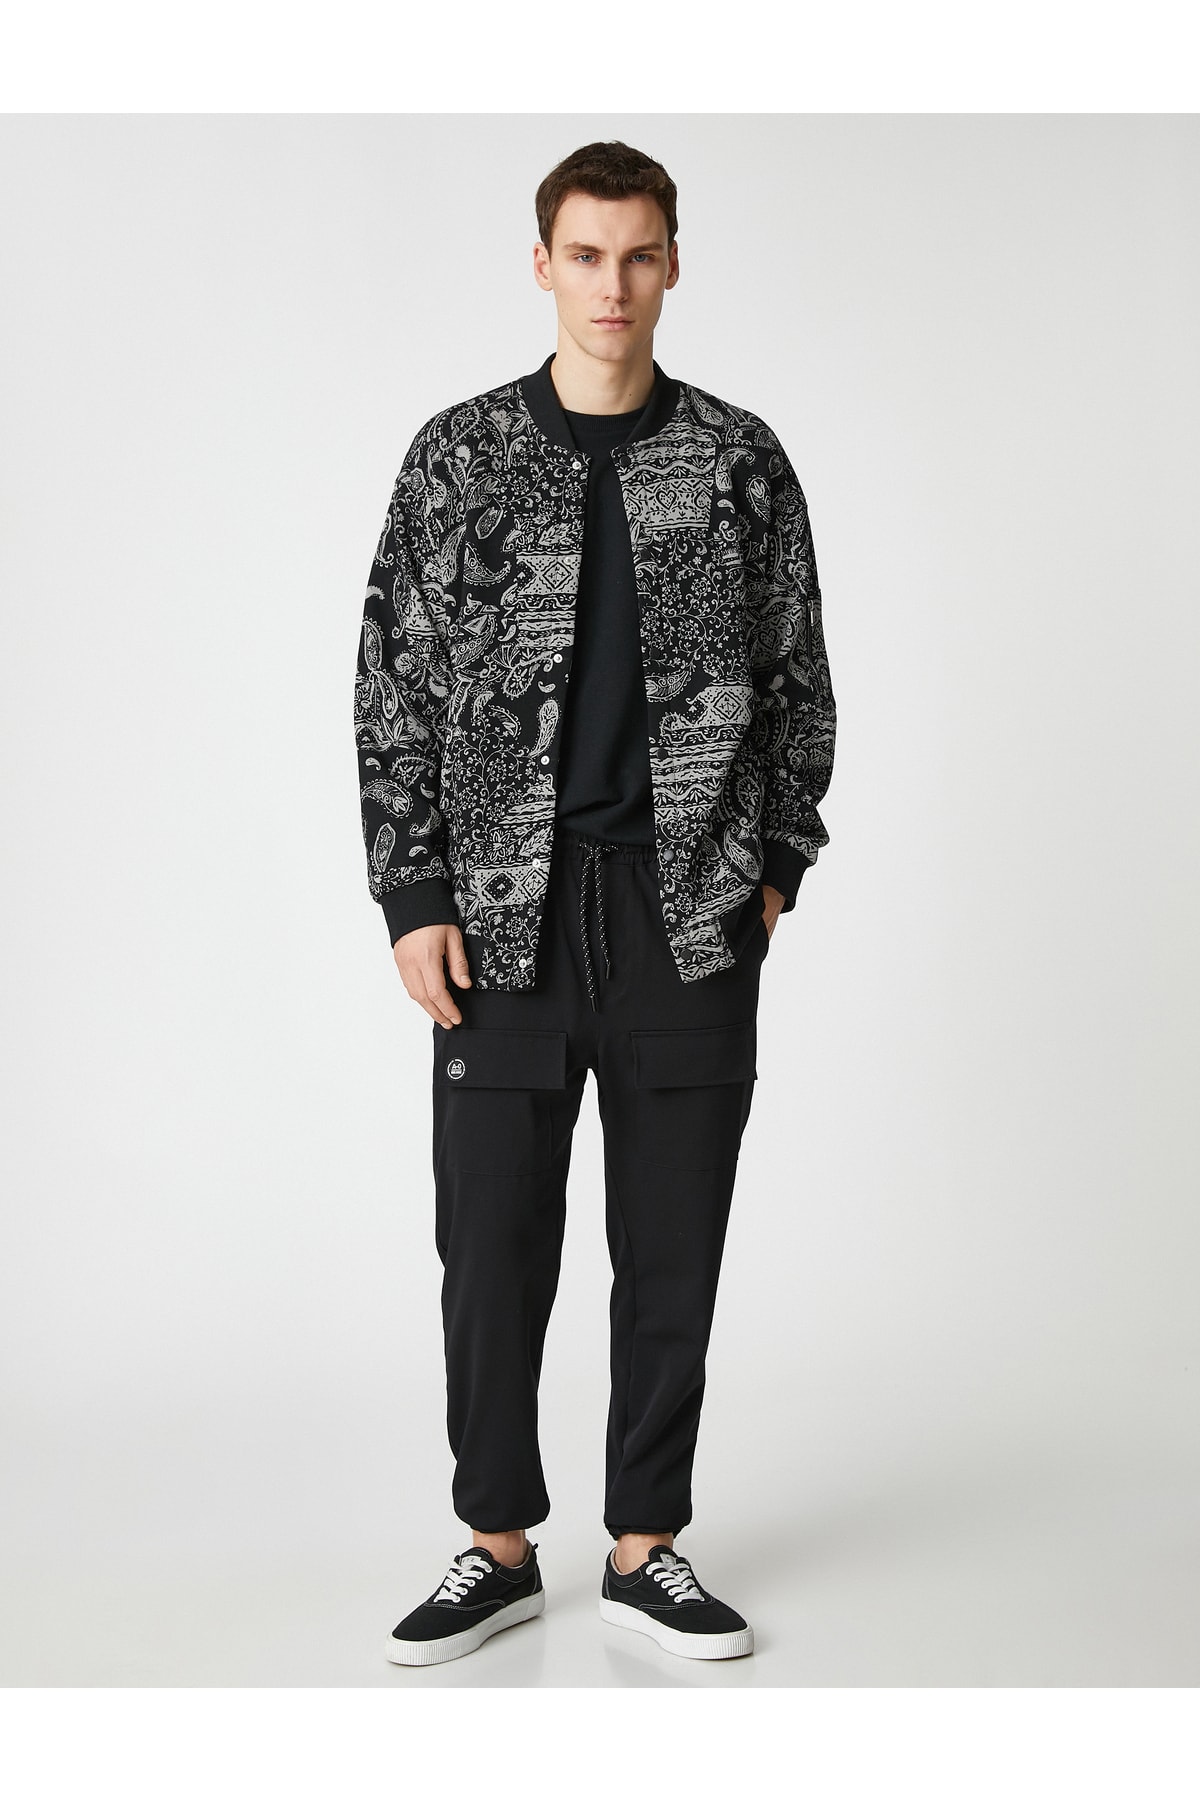 Koton Bomber Jacket with Snap Buttons, Shawl Pattern, Zipper Detail